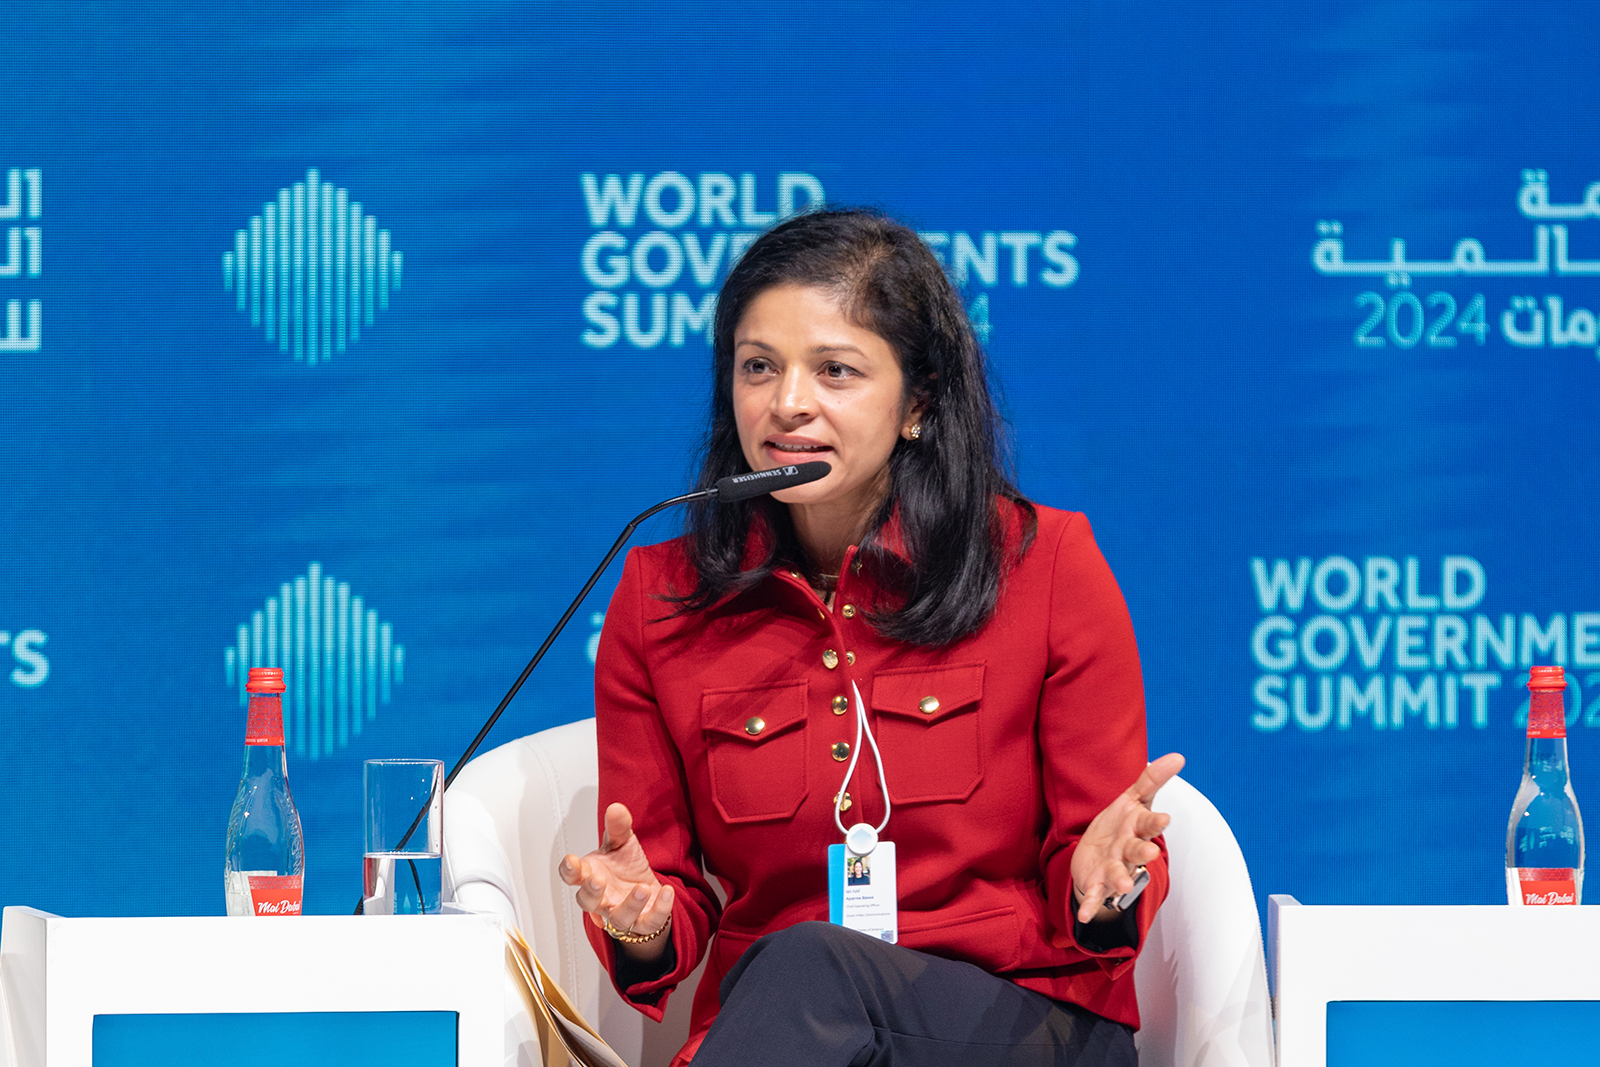 World Governments Summit relied on Zoom for its communication needs